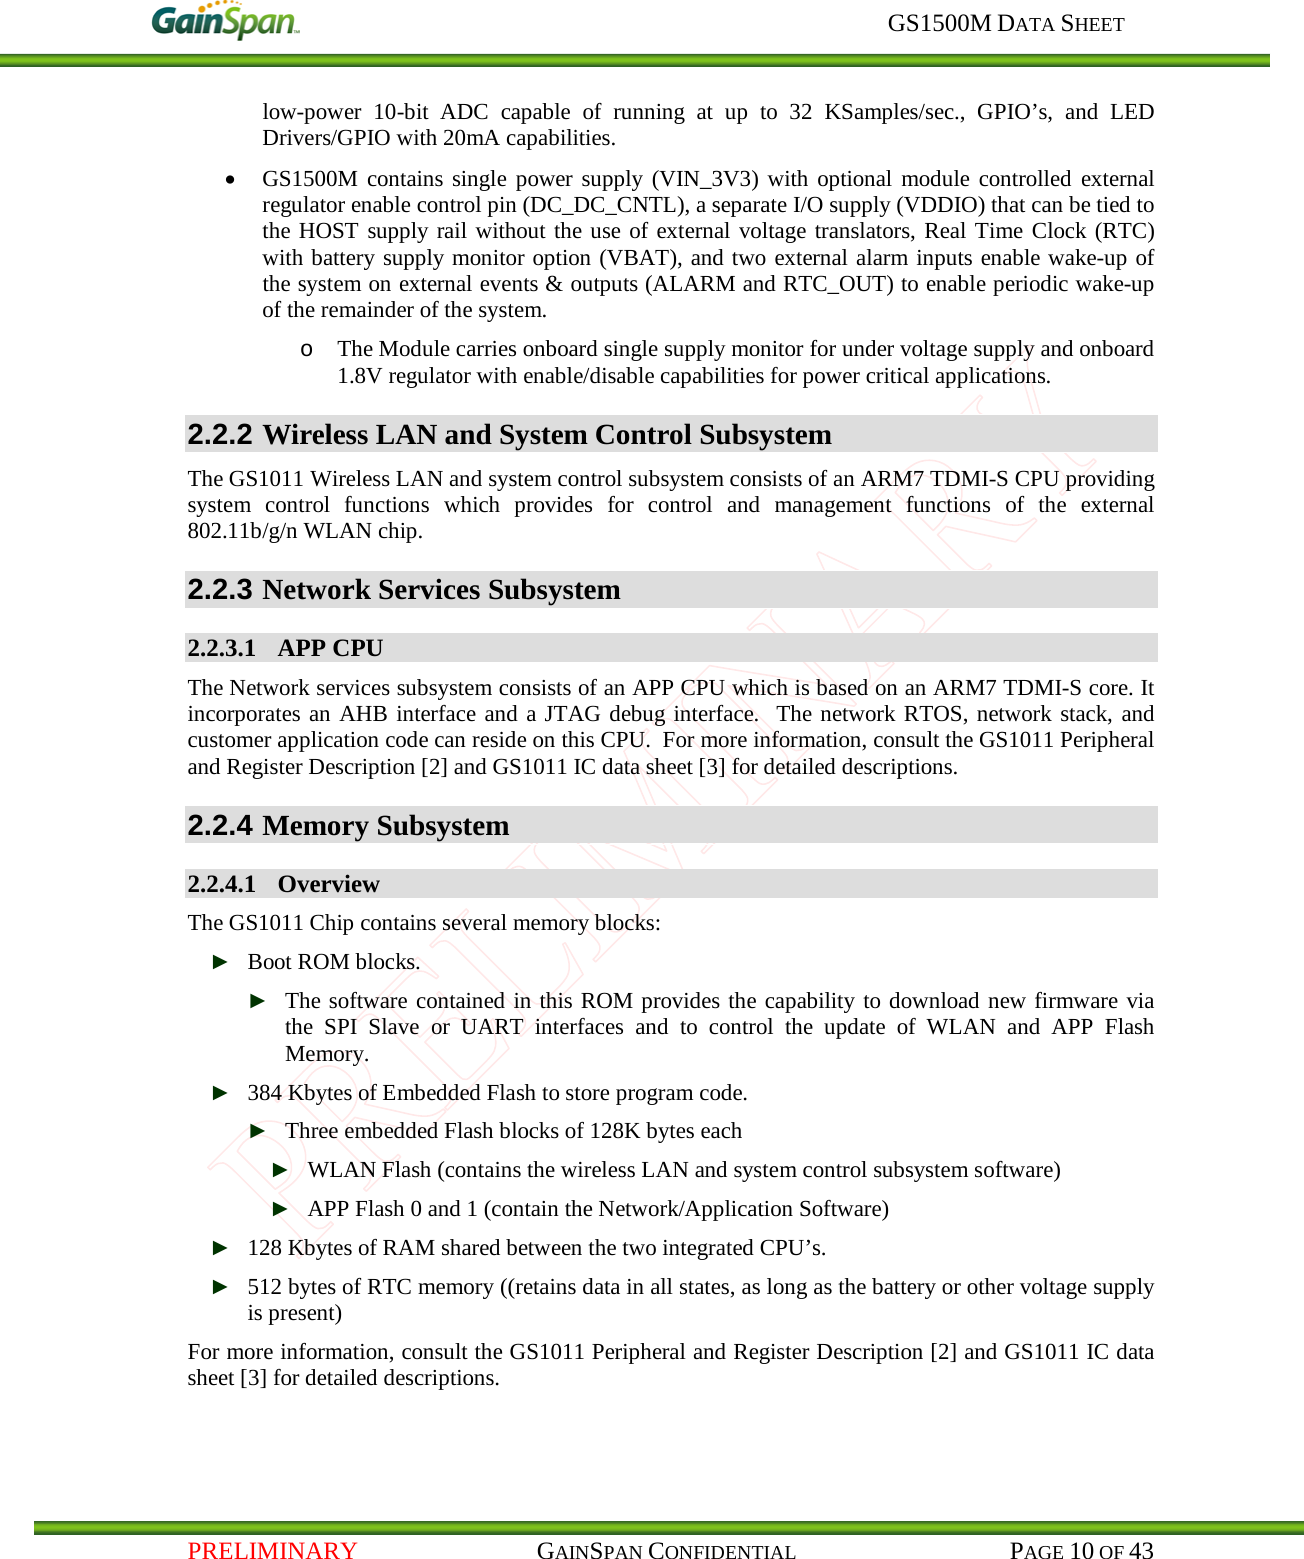     GS1500M DATA SHEET   PRELIMINARY                                    GAINSPAN CONFIDENTIAL                                           PAGE 10 OF 43 low-power  10-bit  ADC  capable of running at up to 32 KSamples/sec.,  GPIO’s,  and  LED Drivers/GPIO with 20mA capabilities. • GS1500M contains single power supply (VIN_3V3) with optional module controlled external regulator enable control pin (DC_DC_CNTL), a separate I/O supply (VDDIO) that can be tied to the HOST supply rail without the use of external voltage translators, Real Time Clock (RTC) with battery supply monitor option (VBAT), and two external alarm inputs enable wake-up of the system on external events &amp; outputs (ALARM and RTC_OUT) to enable periodic wake-up of the remainder of the system.  o The Module carries onboard single supply monitor for under voltage supply and onboard 1.8V regulator with enable/disable capabilities for power critical applications.  2.2.2 Wireless LAN and System Control Subsystem The GS1011 Wireless LAN and system control subsystem consists of an ARM7 TDMI-S CPU providing system control functions which  provides  for control and management functions of the external 802.11b/g/n WLAN chip. 2.2.3 Network Services Subsystem 2.2.3.1 APP CPU The Network services subsystem consists of an APP CPU which is based on an ARM7 TDMI-S core. It incorporates an AHB interface and a JTAG debug interface.  The network RTOS, network stack, and customer application code can reside on this CPU.  For more information, consult the GS1011 Peripheral and Register Description [2] and GS1011 IC data sheet [3] for detailed descriptions. 2.2.4 Memory Subsystem 2.2.4.1 Overview The GS1011 Chip contains several memory blocks: ► Boot ROM blocks. ► The software contained in this ROM provides the capability to download new firmware via the SPI Slave or UART interfaces and to control the update of WLAN and APP Flash Memory.   ► 384 Kbytes of Embedded Flash to store program code. ► Three embedded Flash blocks of 128K bytes each ► WLAN Flash (contains the wireless LAN and system control subsystem software) ► APP Flash 0 and 1 (contain the Network/Application Software) ► 128 Kbytes of RAM shared between the two integrated CPU’s. ► 512 bytes of RTC memory ((retains data in all states, as long as the battery or other voltage supply is present) For more information, consult the GS1011 Peripheral and Register Description [2] and GS1011 IC data sheet [3] for detailed descriptions.    